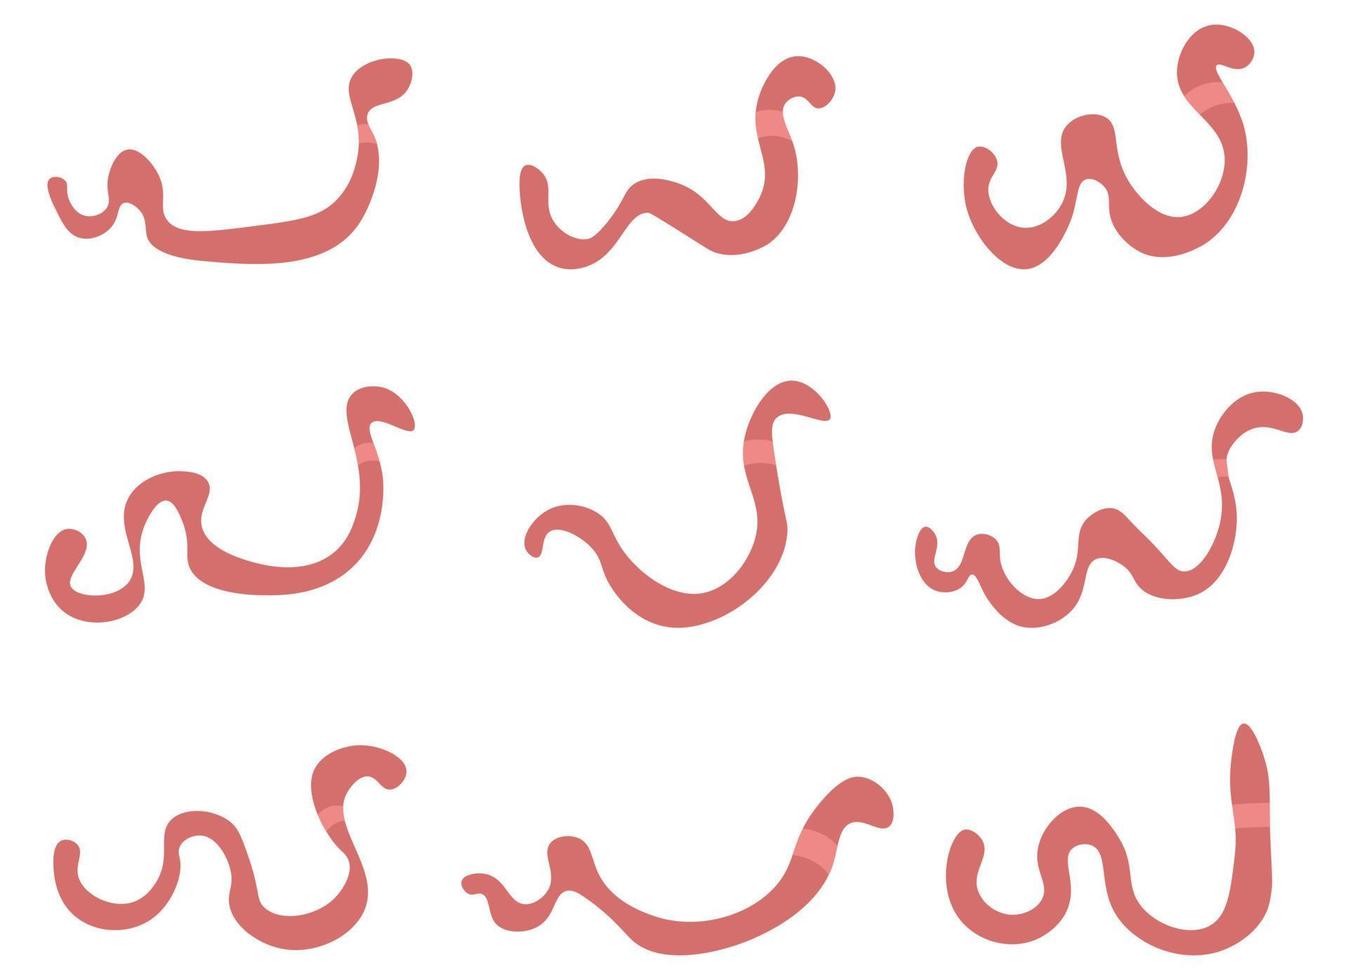 worm design illustration isolated on white background vector